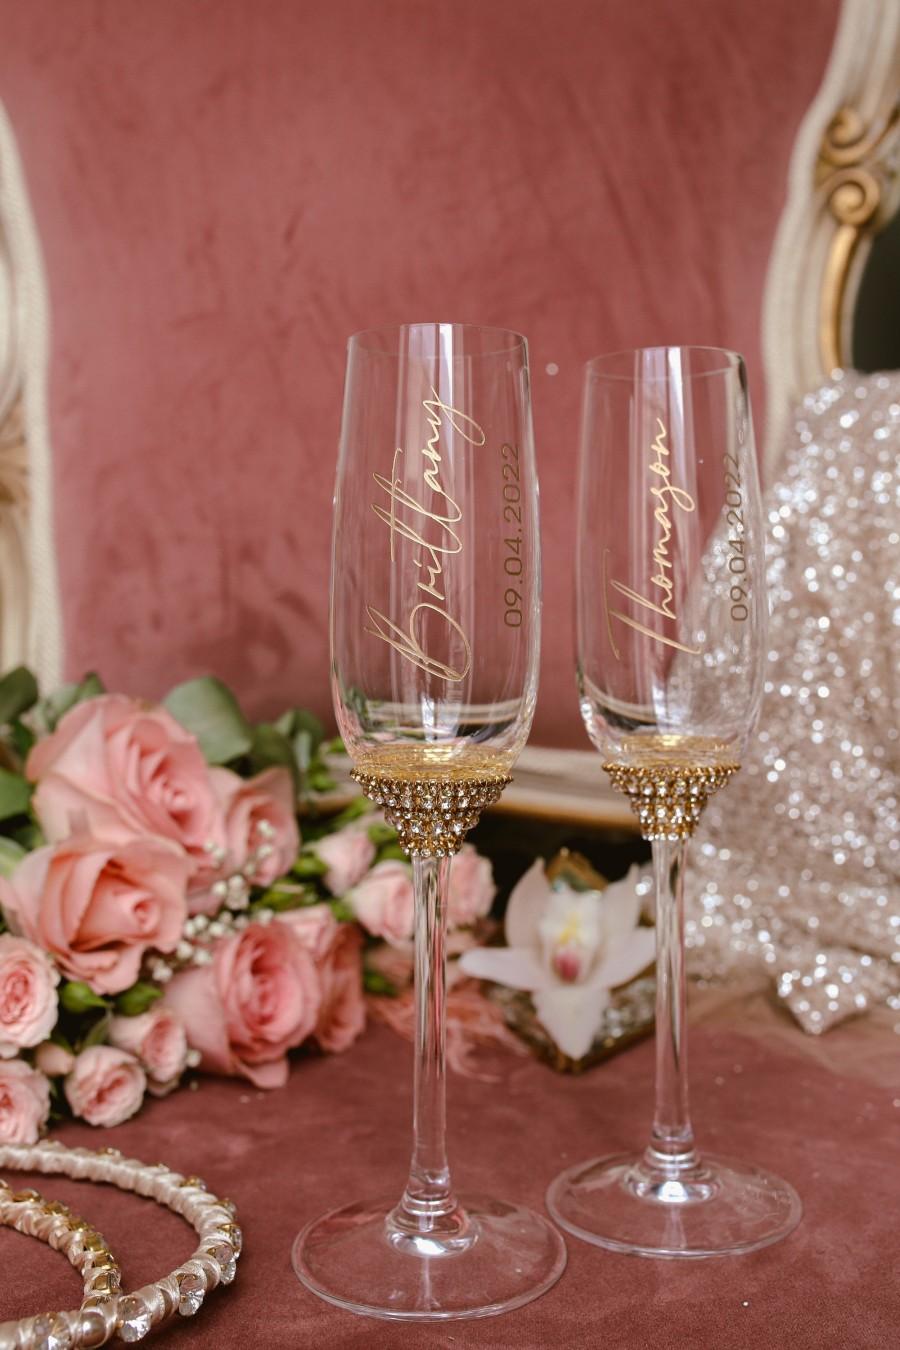 Wedding - Personalized wedding champagne flutes Mr and Mrs Laser engraved Anniversary gift Personalized Engraved Wedding champagne glasses, set of 2